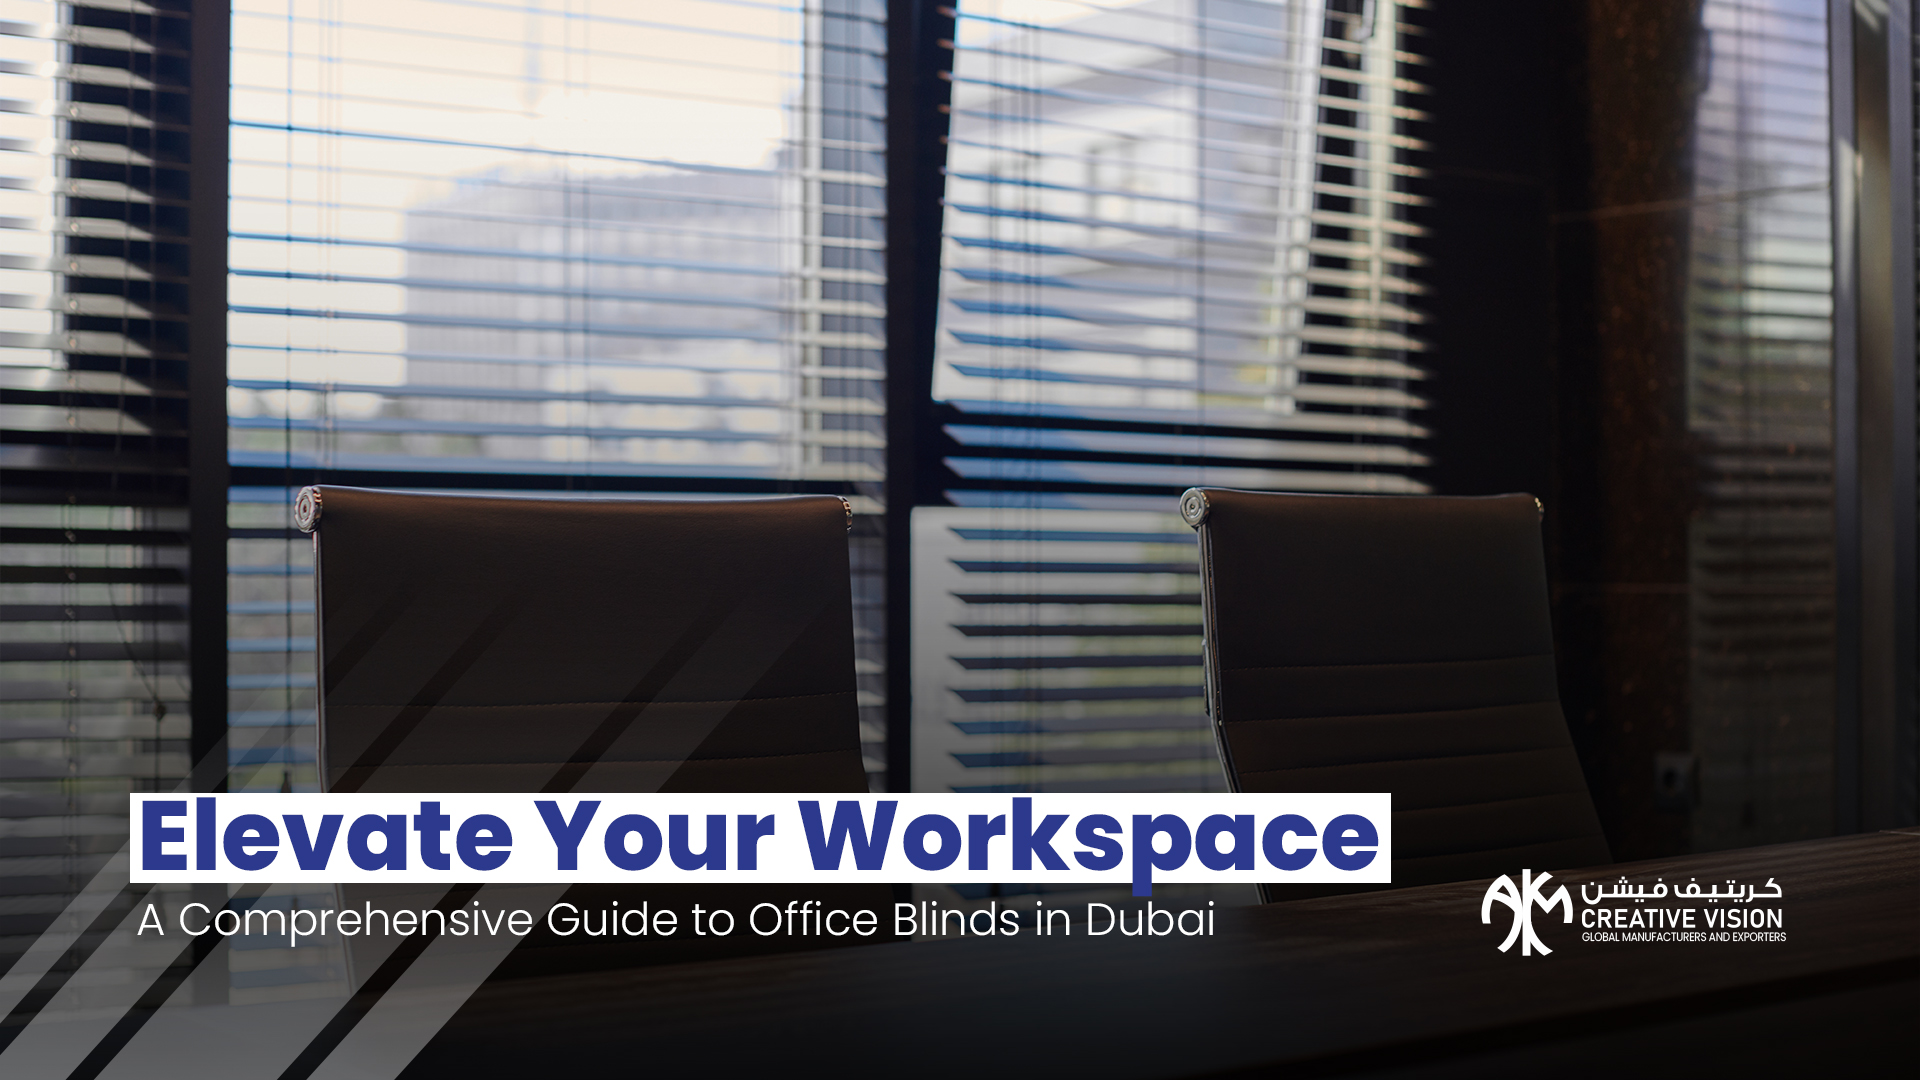 Elevate Your Workspace: A Comprehensive Guide to Office Blinds in Dubai